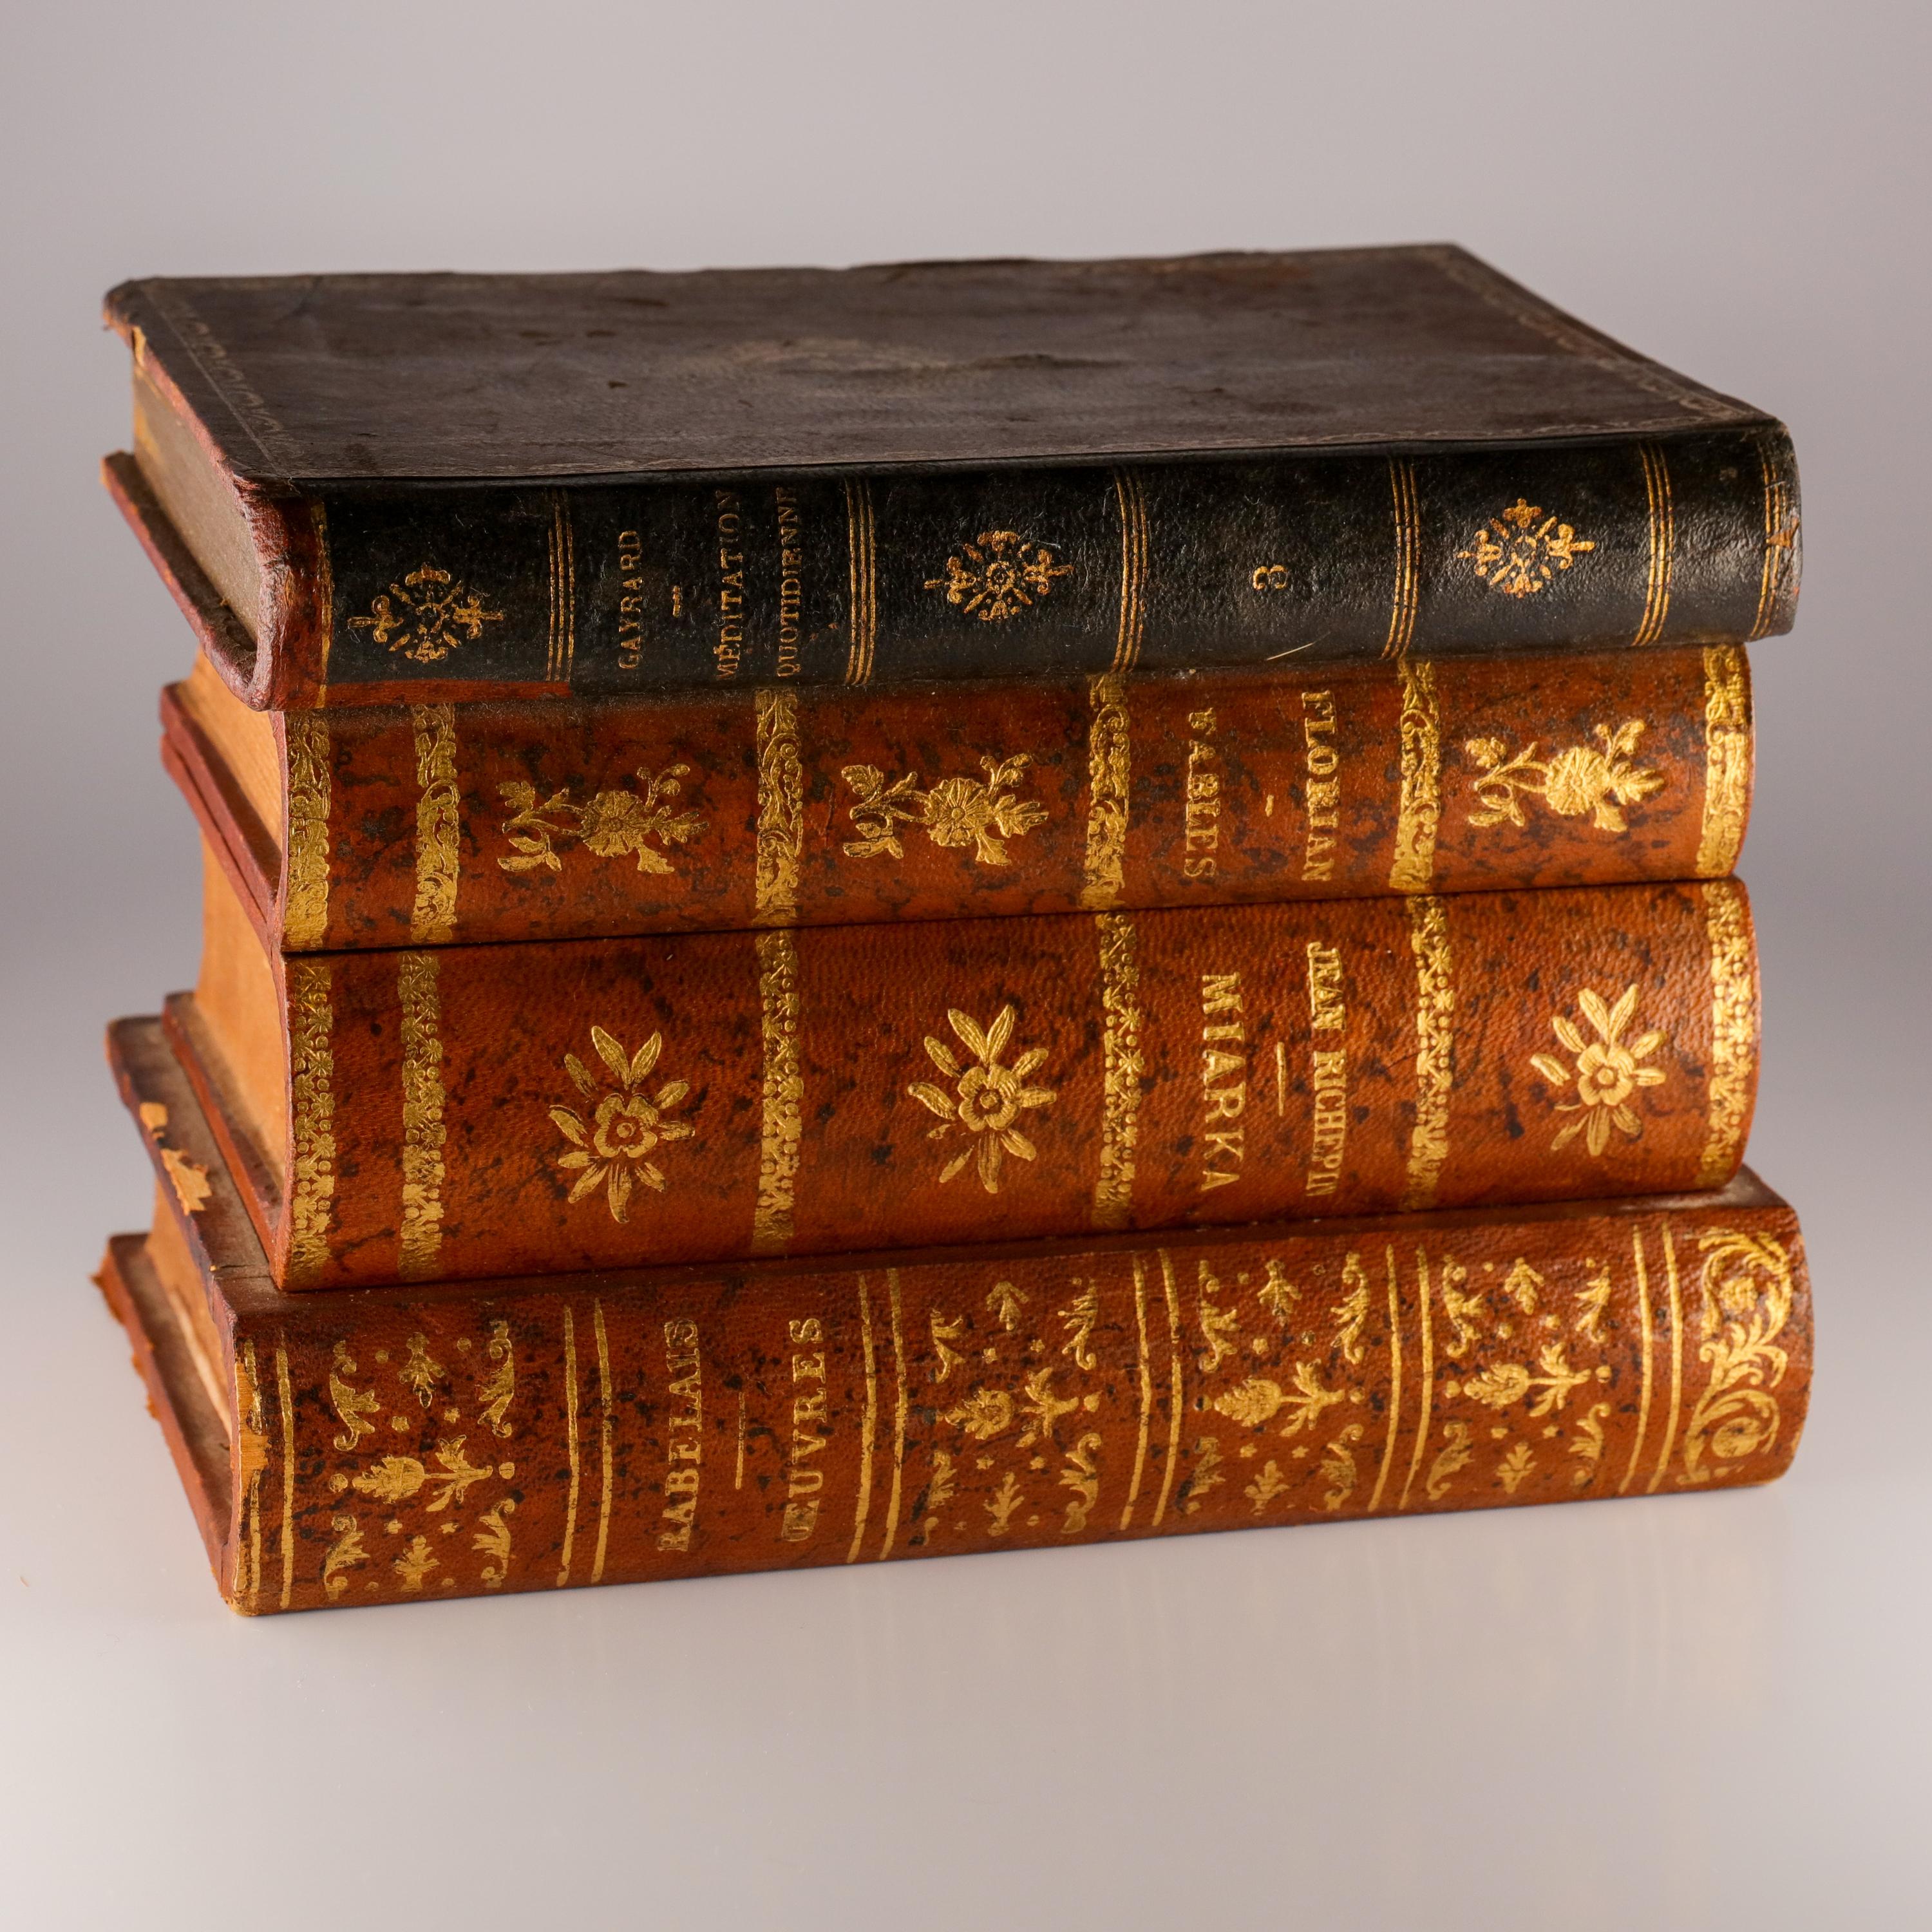 From a distance, it's just a stack of lovely antique leather-bound French books. But lift the top book and a cunning brass hinge is deployed, raising the 